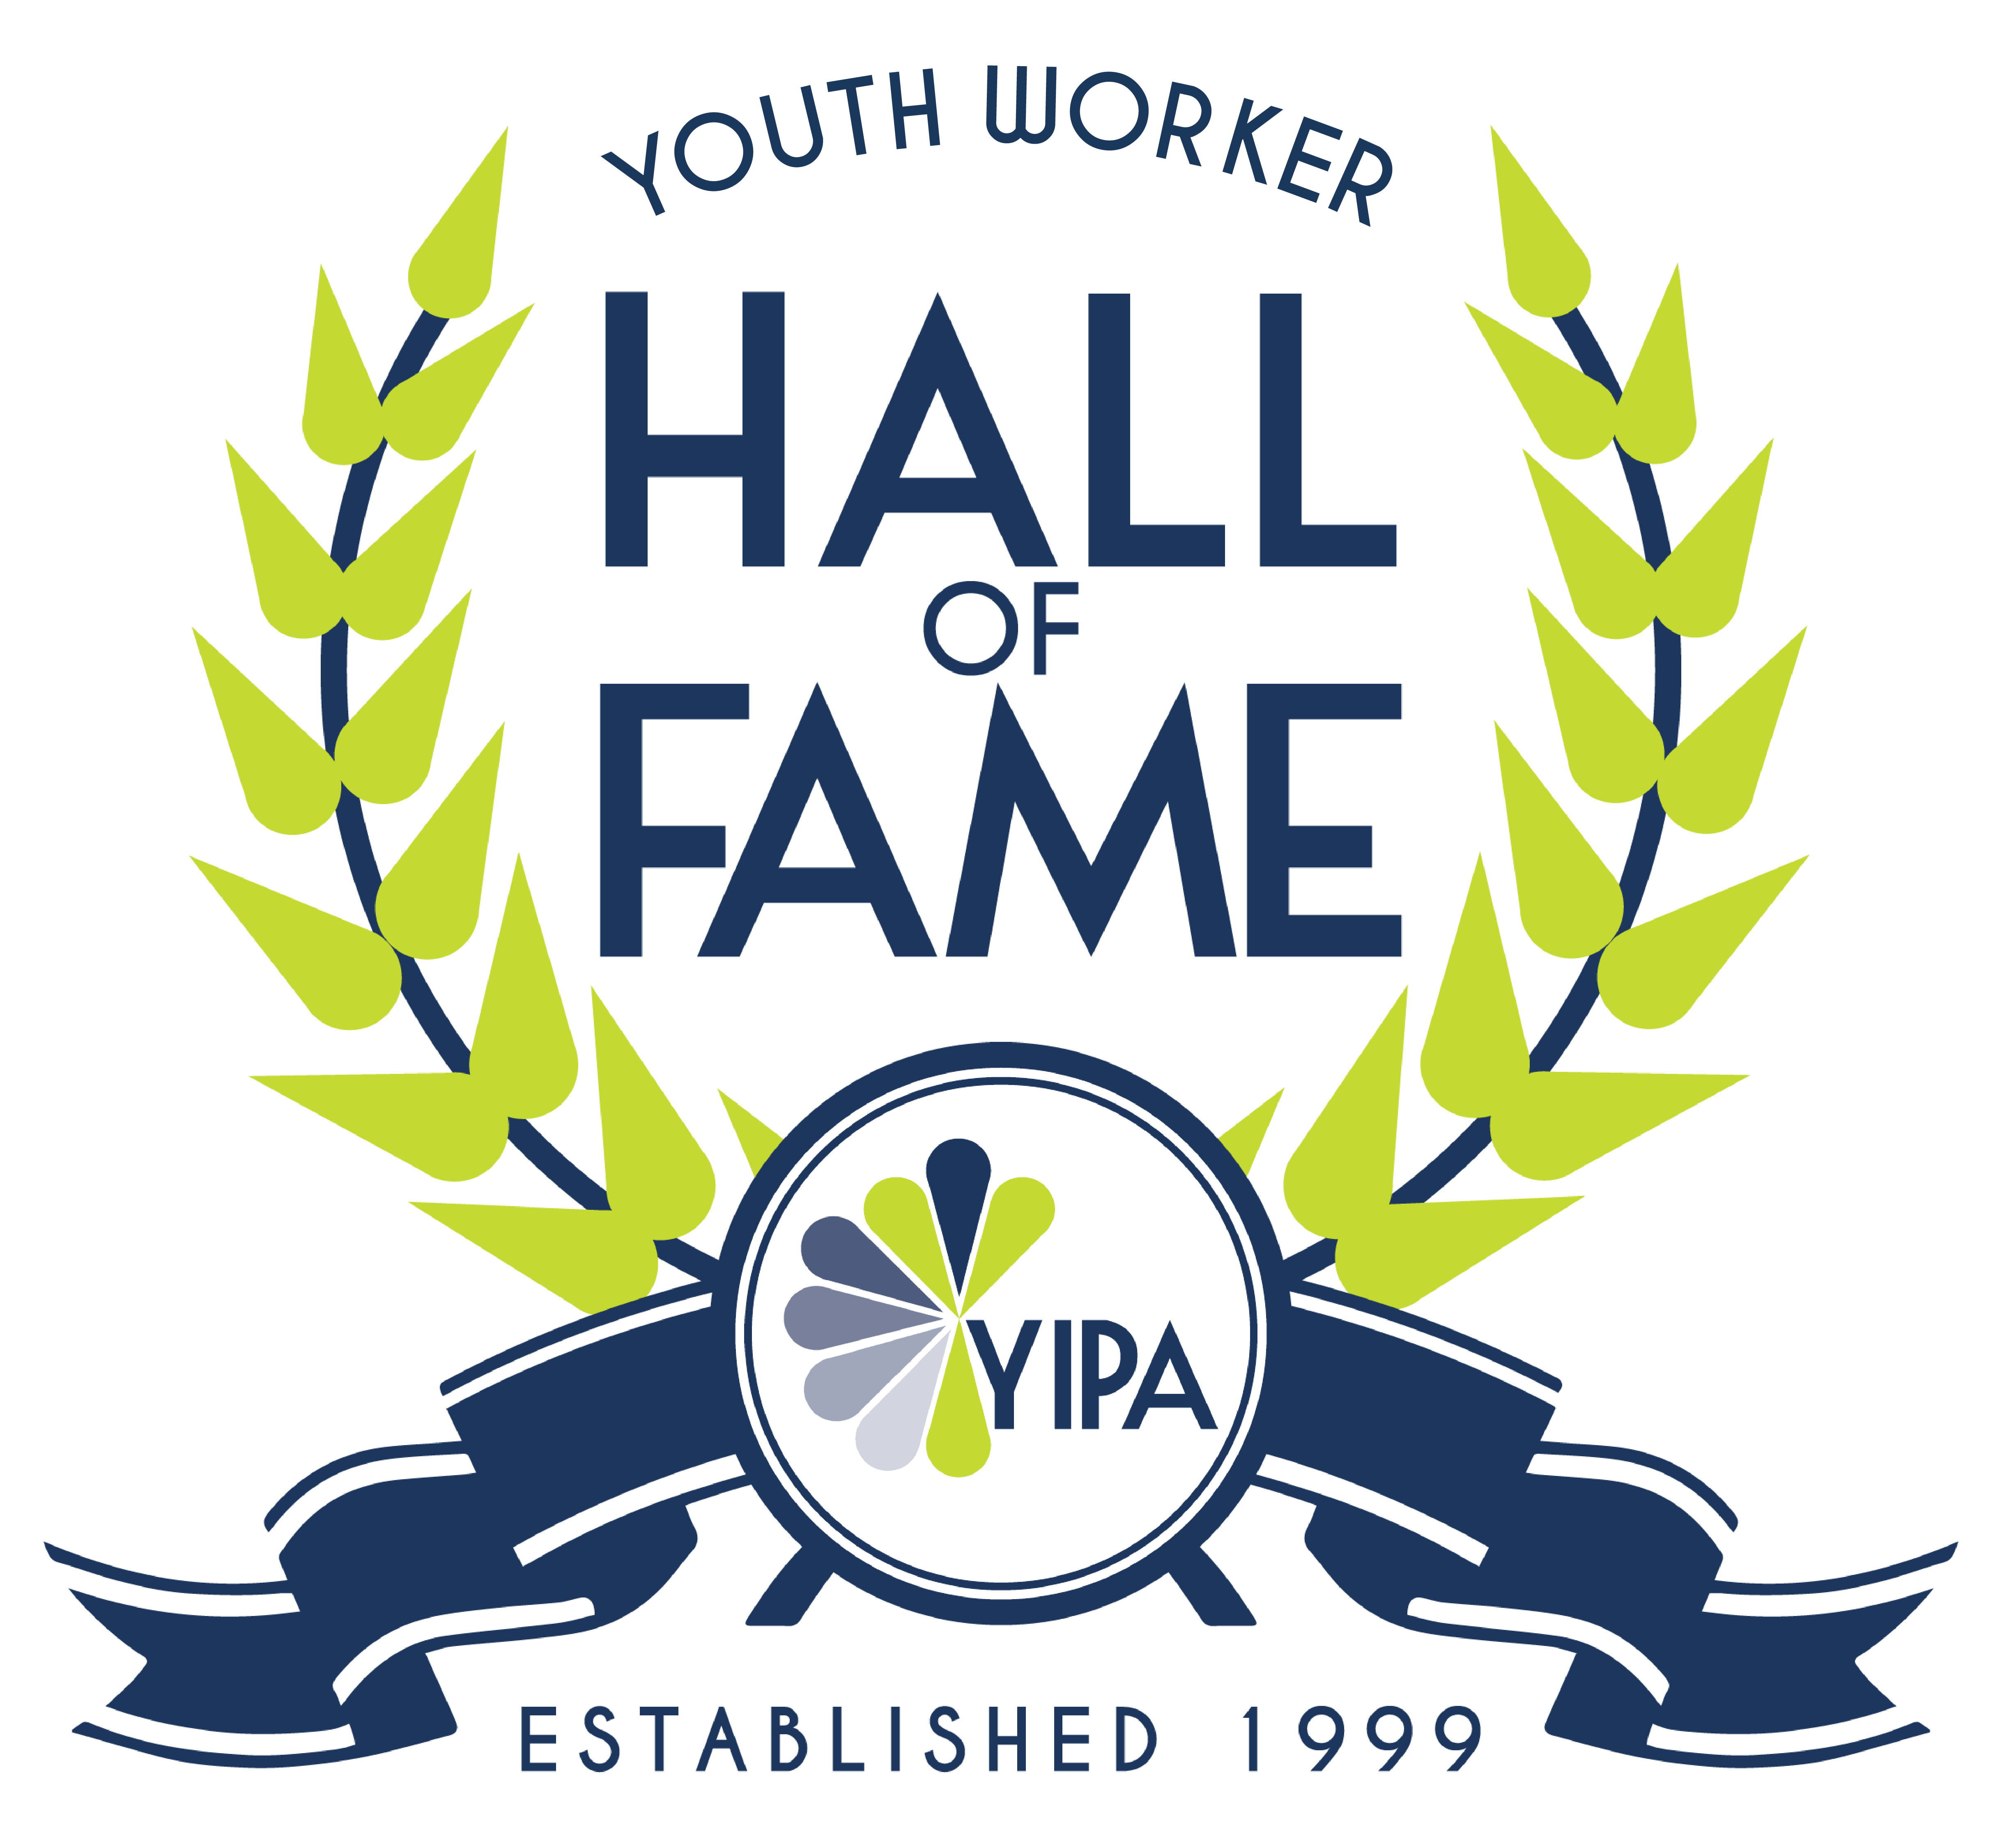 Youth workers Hall of Fame